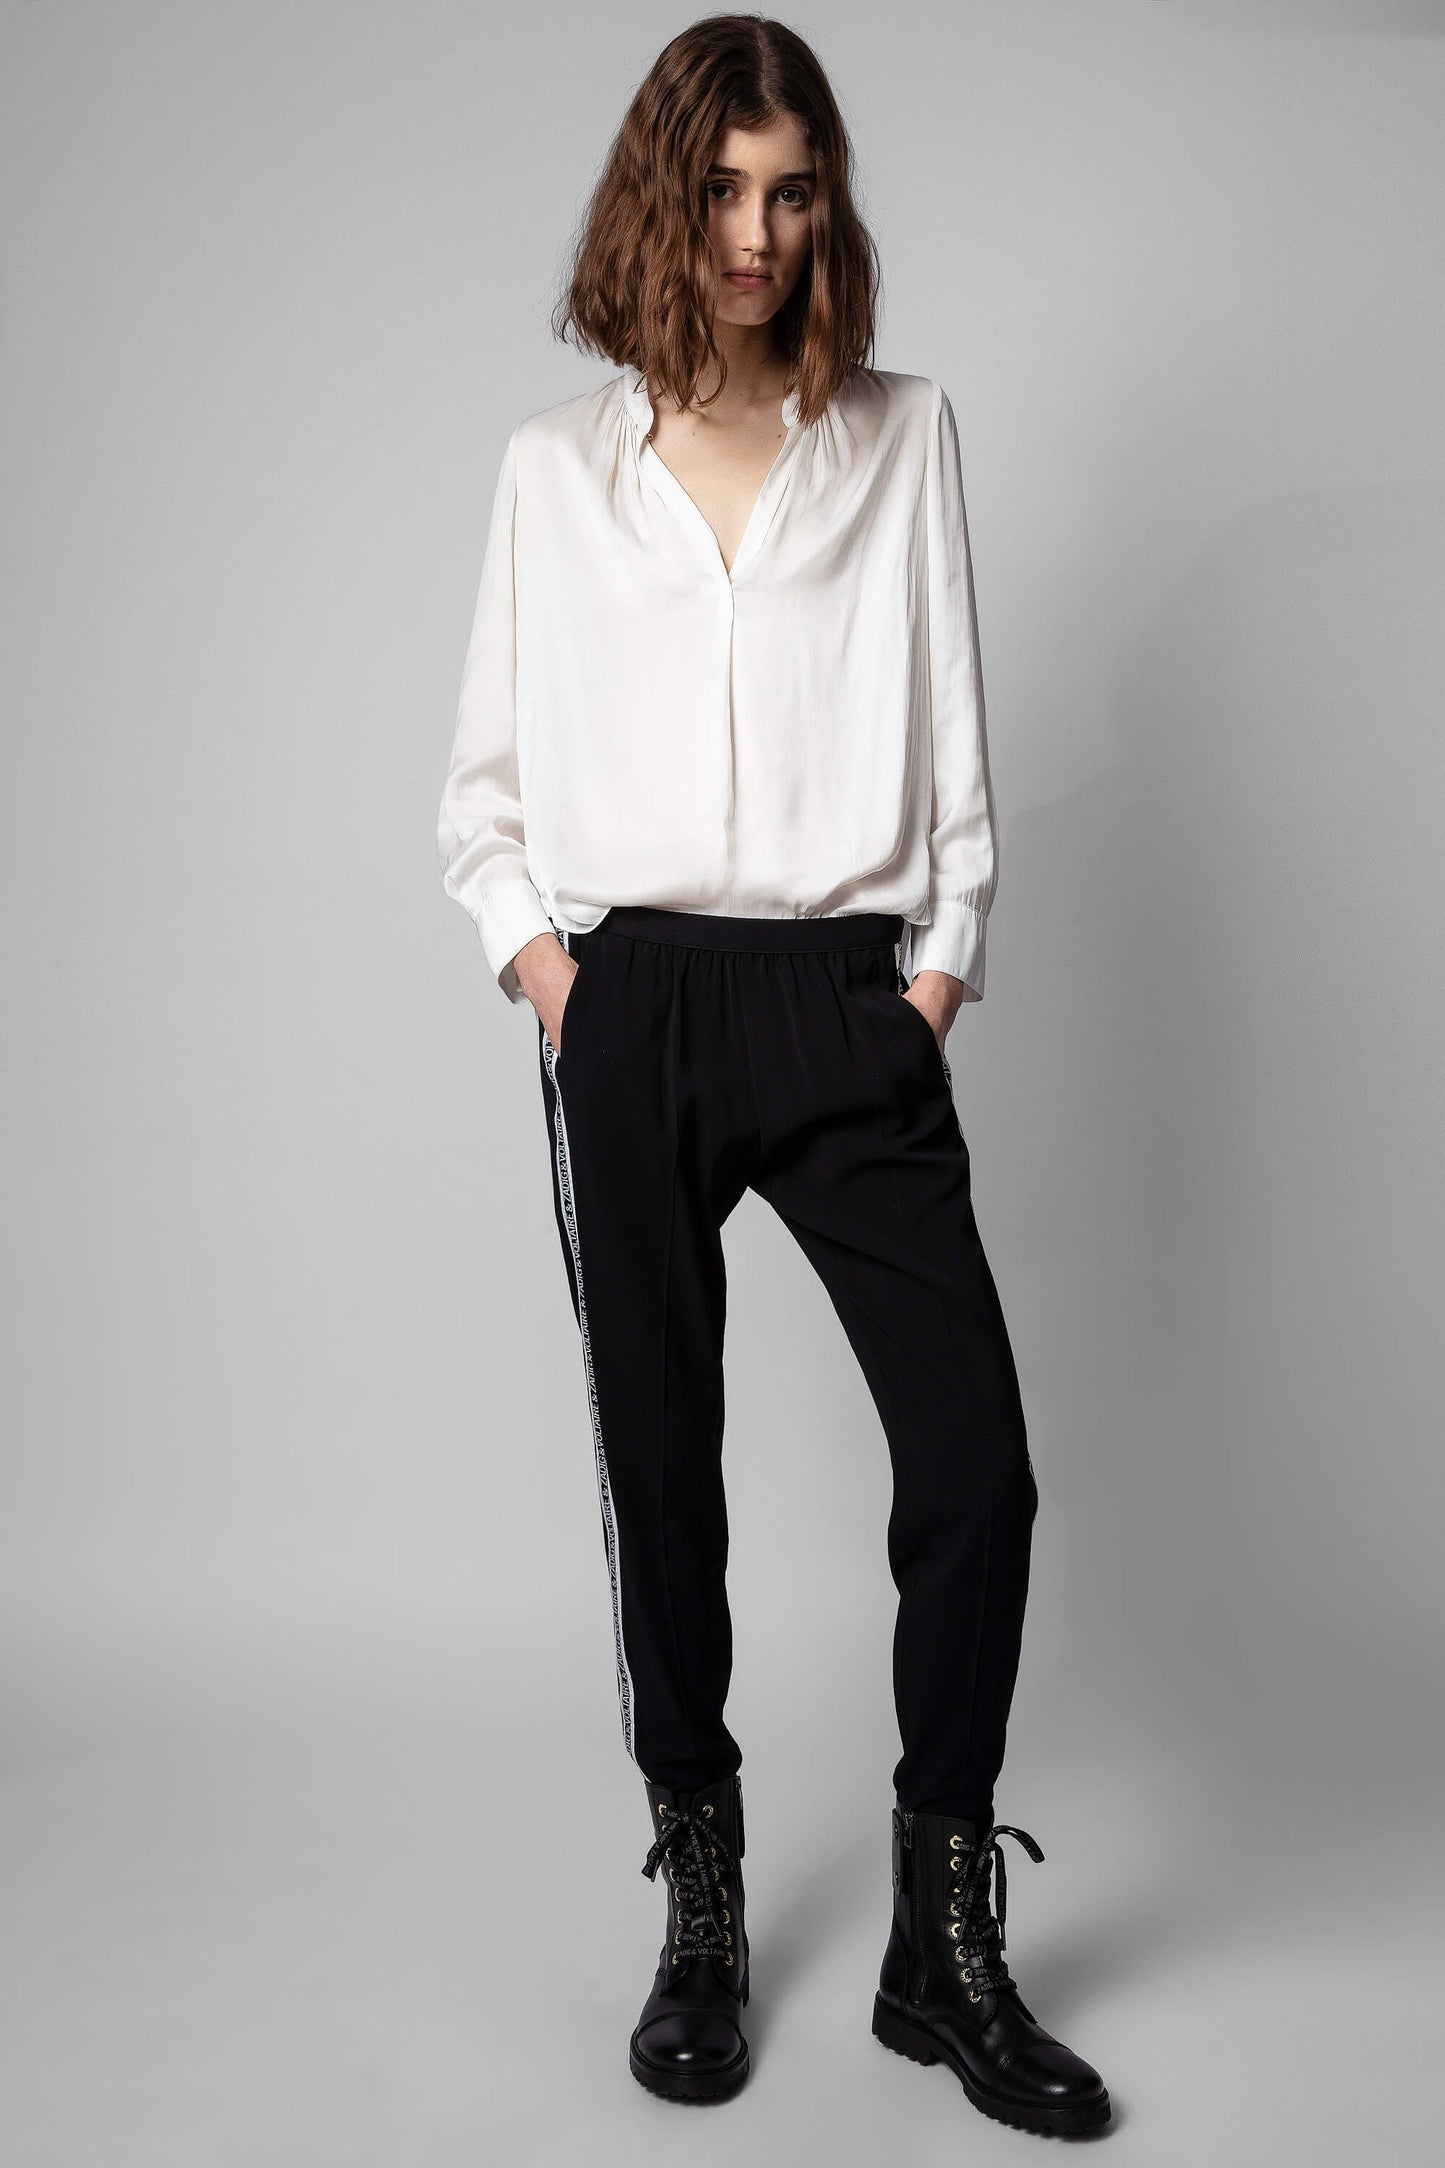 Tink Satin Shirt  in Blanc white by ZADIG - SALE